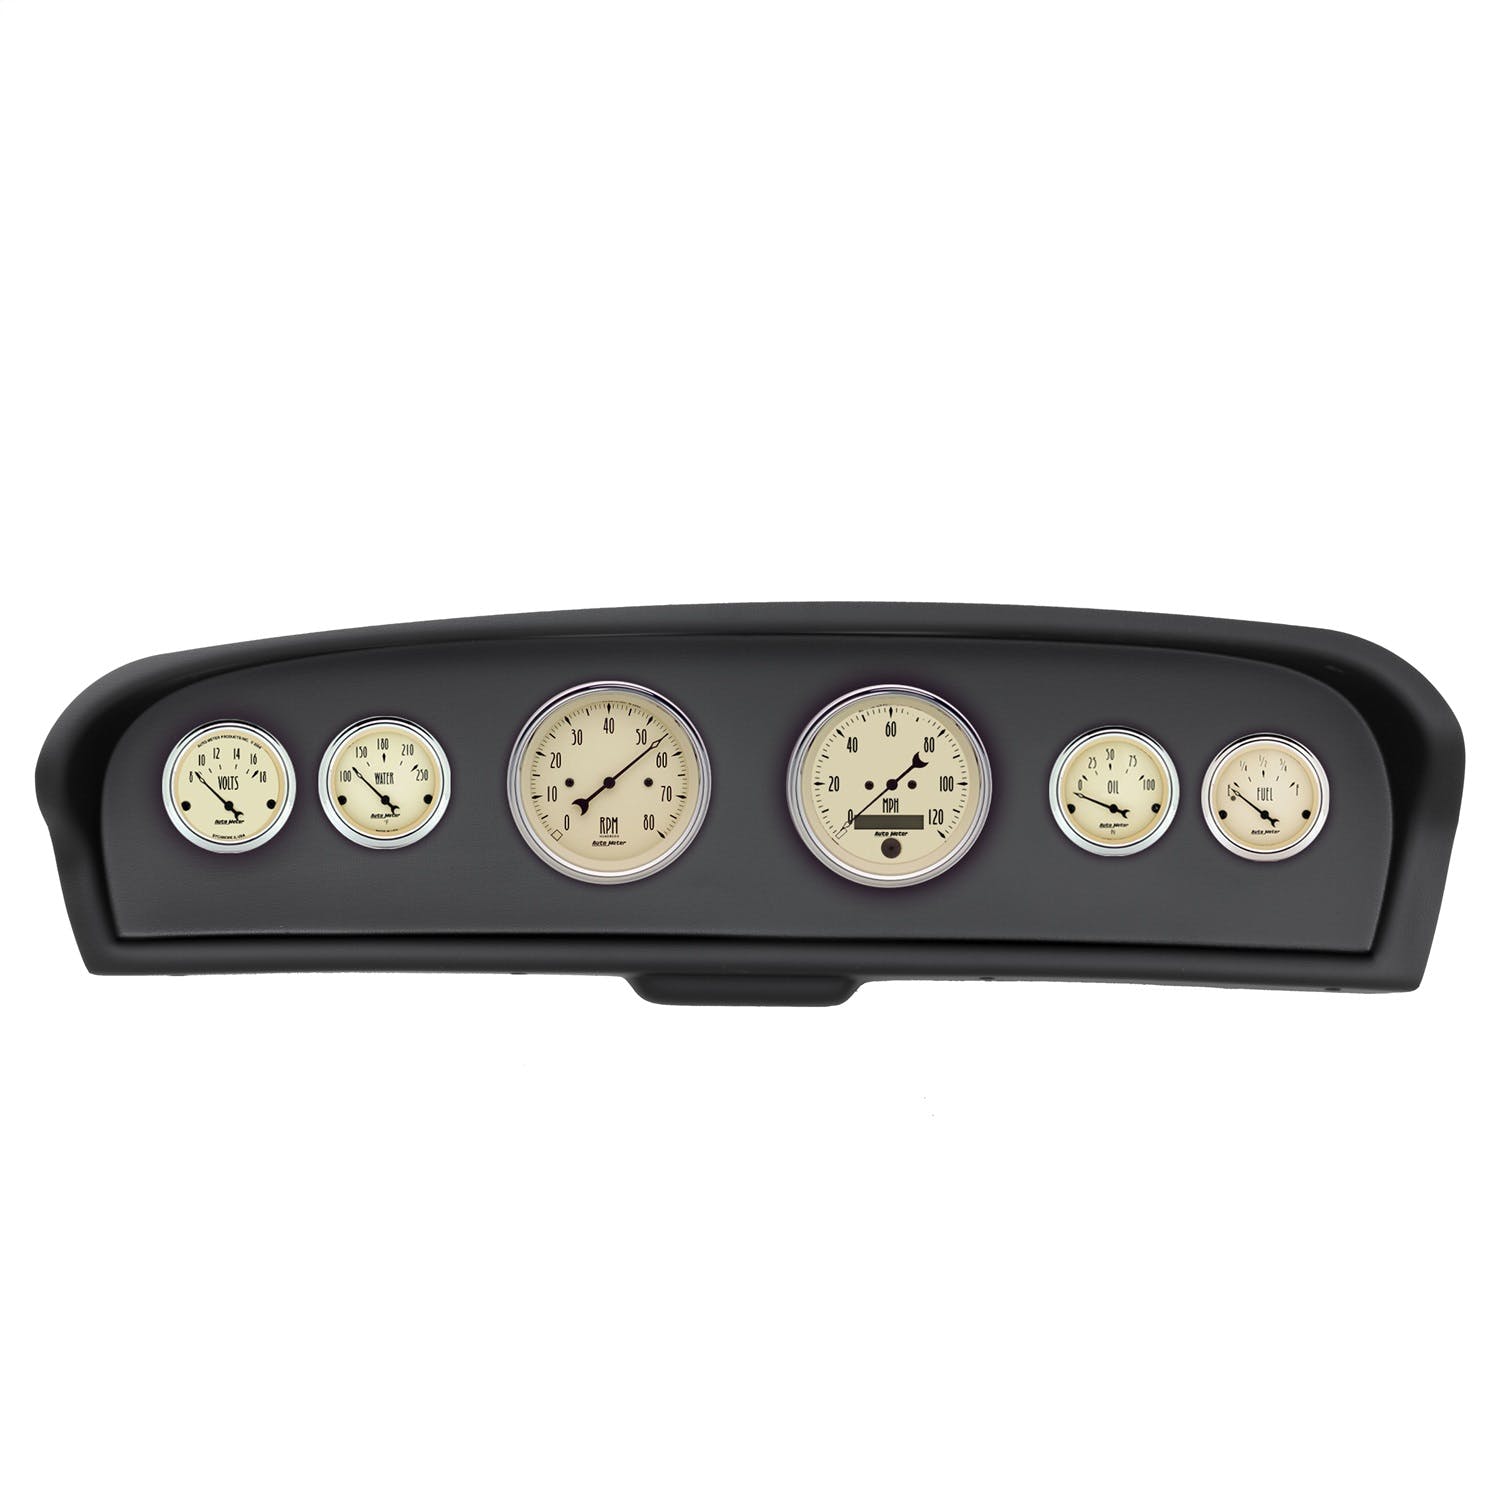 AutoMeter Products 2144-02 6 Gauge Direct-Fit Dash Kit, Ford Truck 61-66, Antique Beige